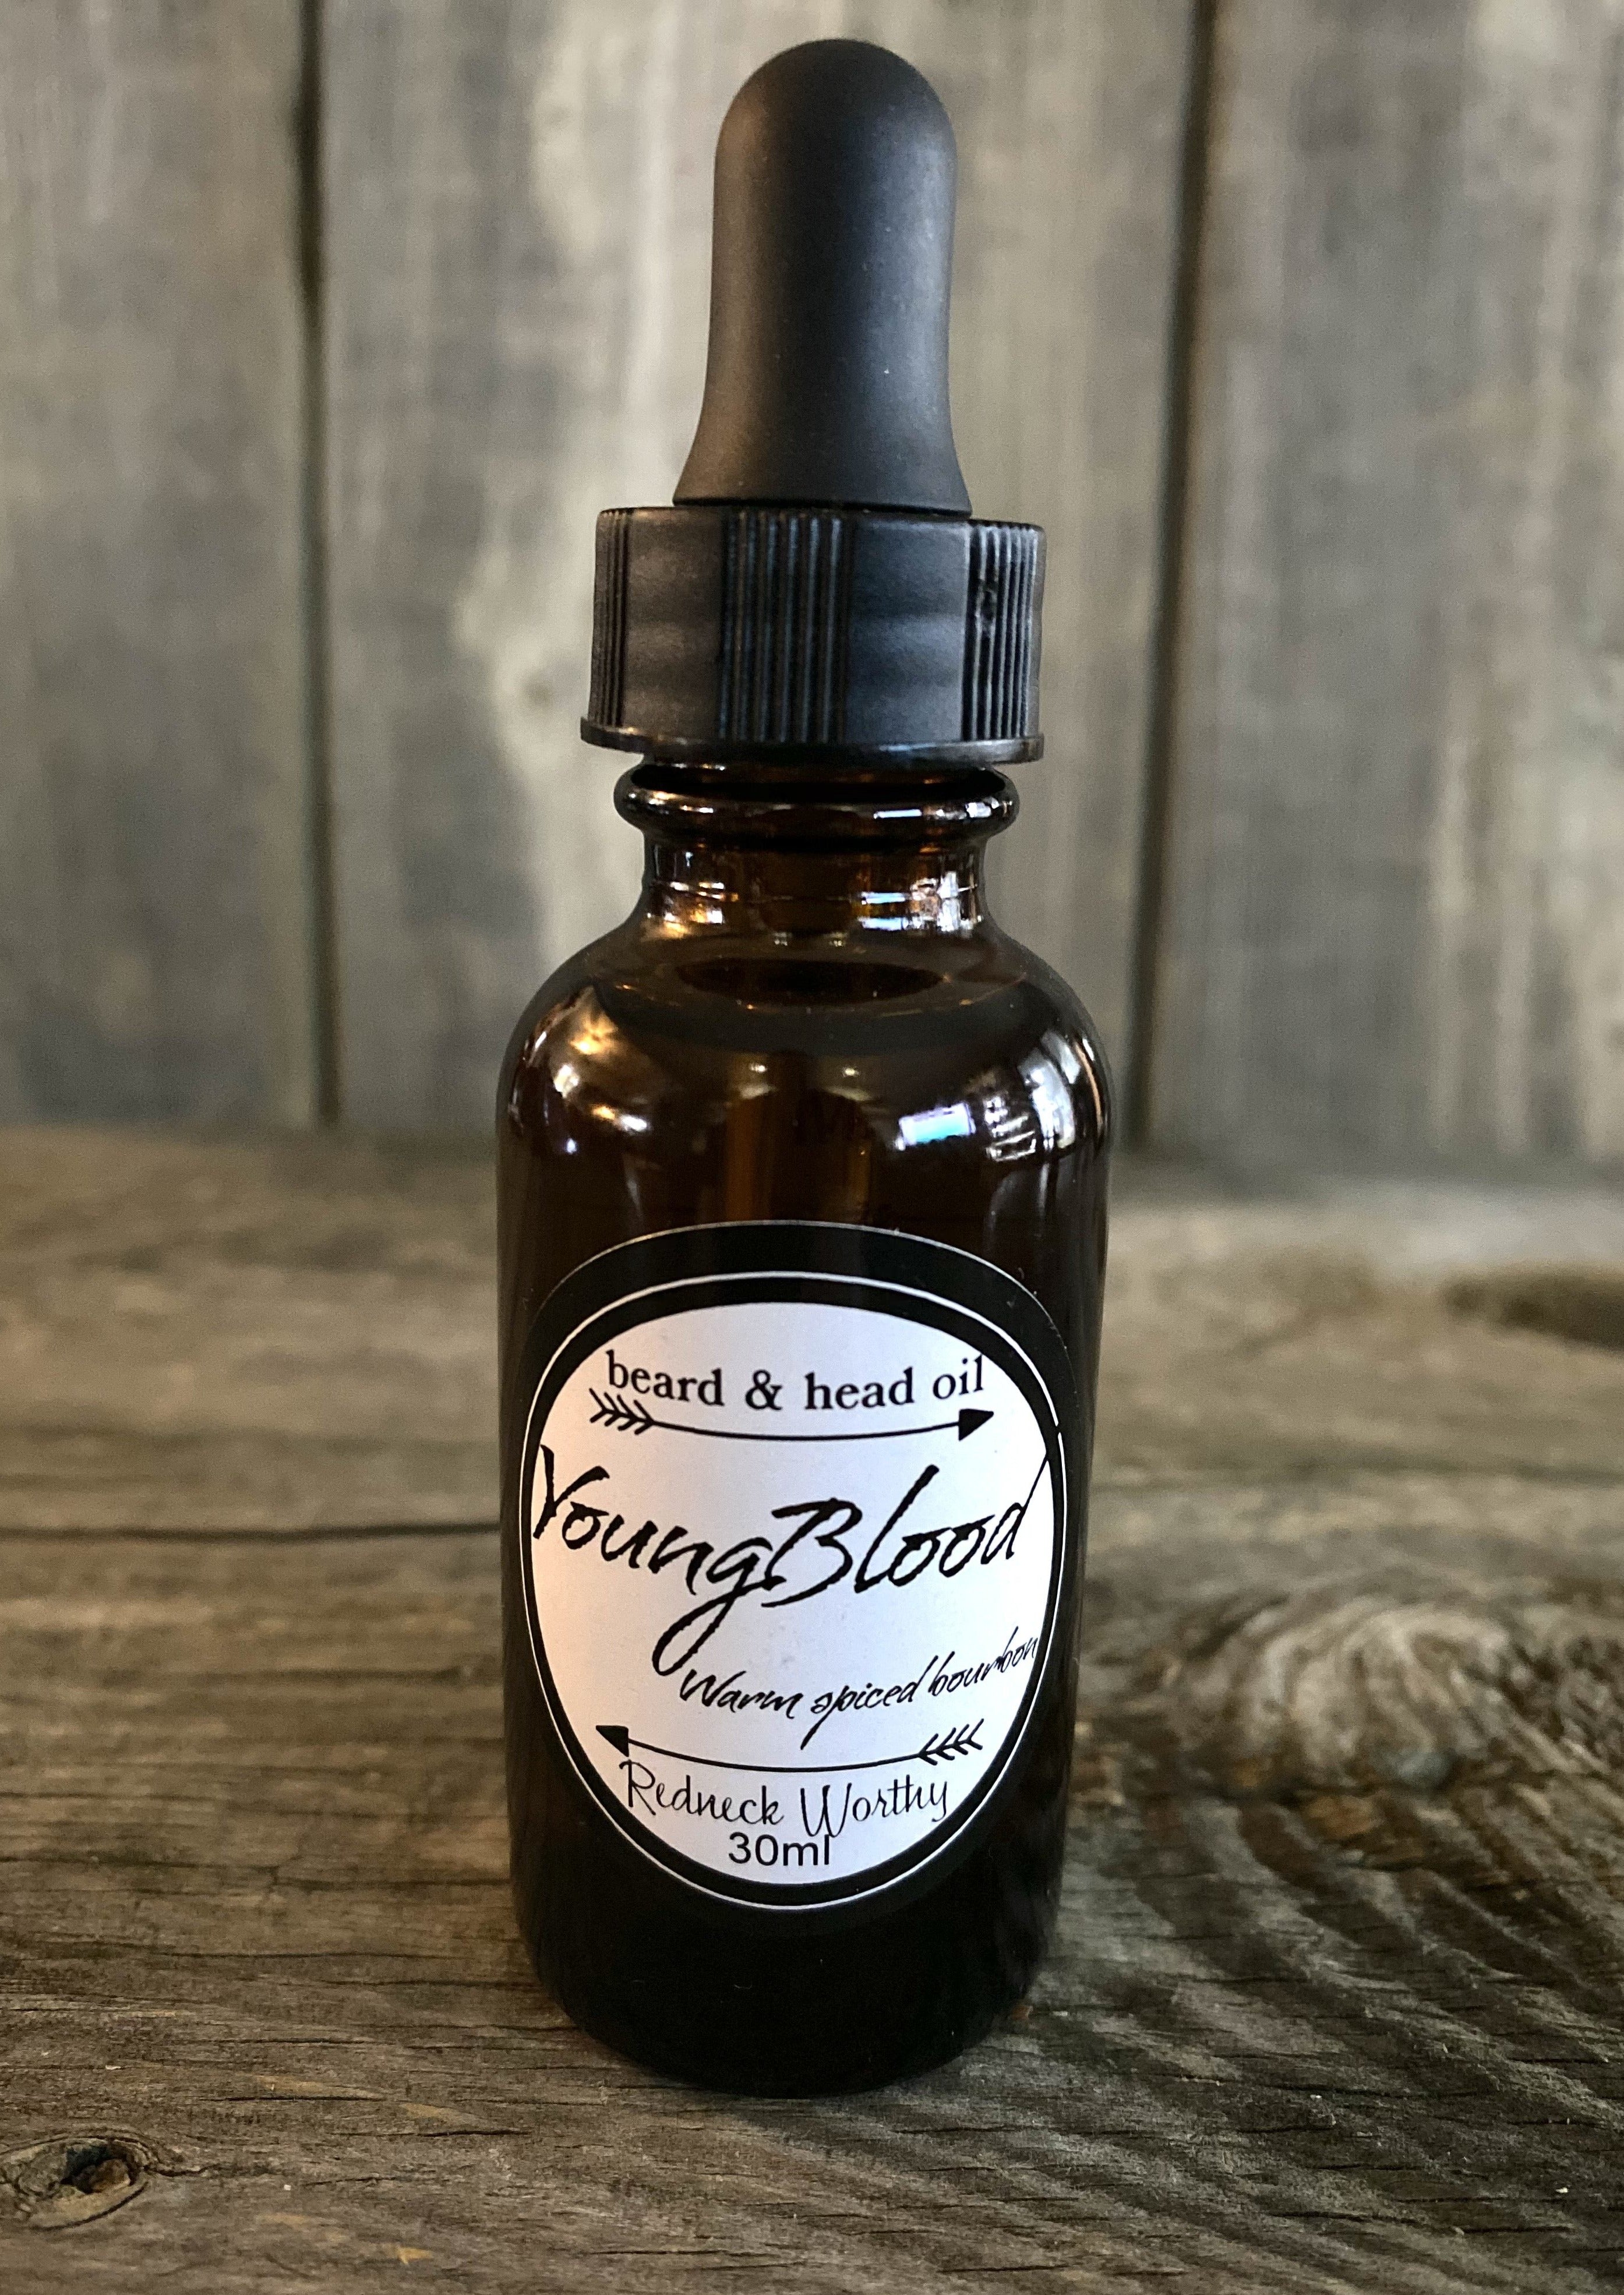 Young Blood beard oil